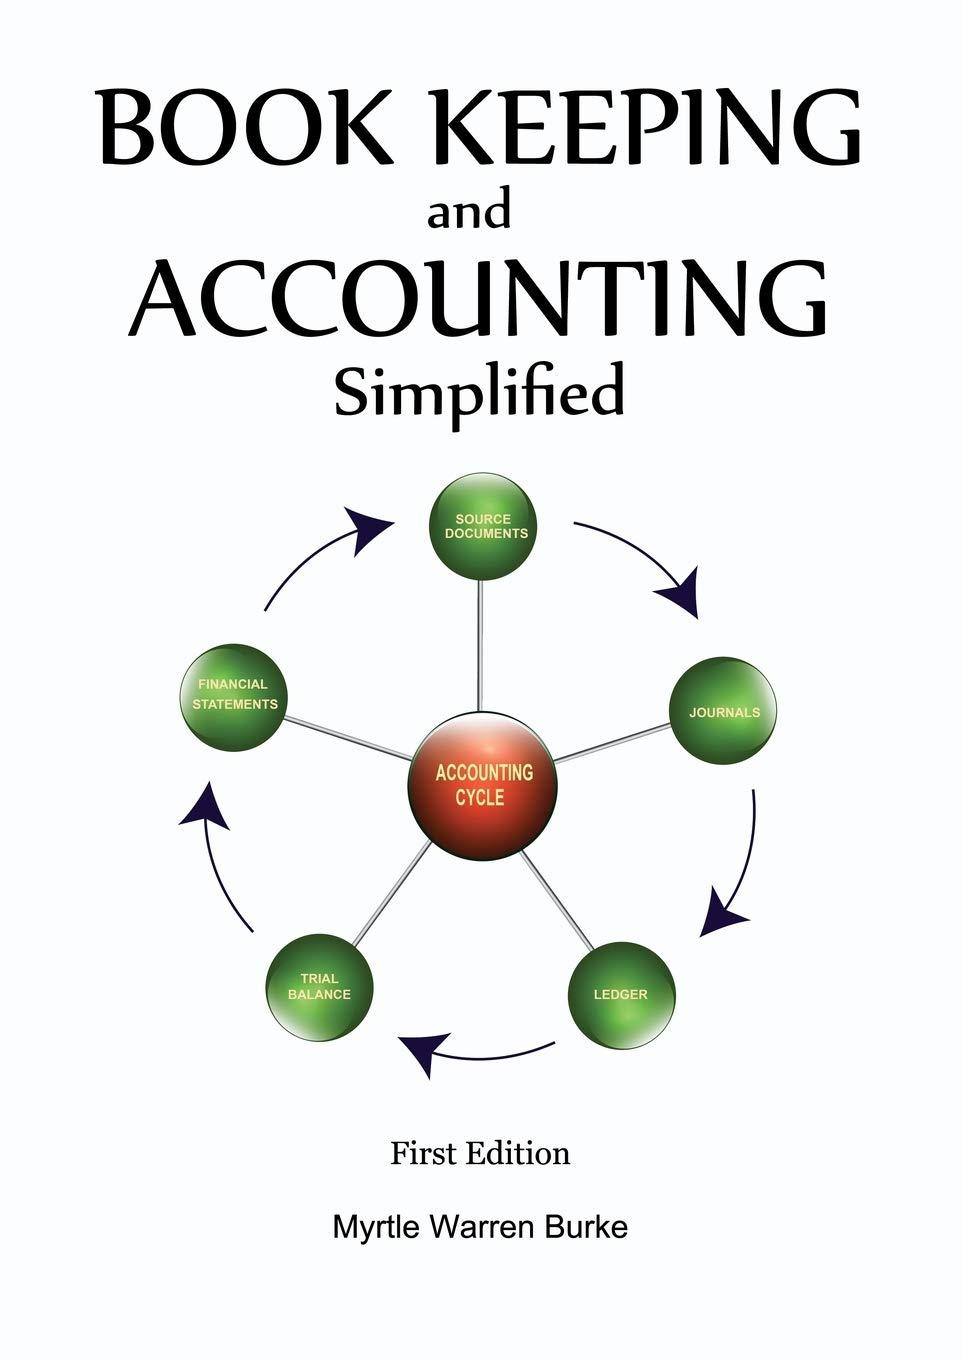 book keeping and accounting simplified 1st edition myrtle warren burke 1908552255, 978-1908552259